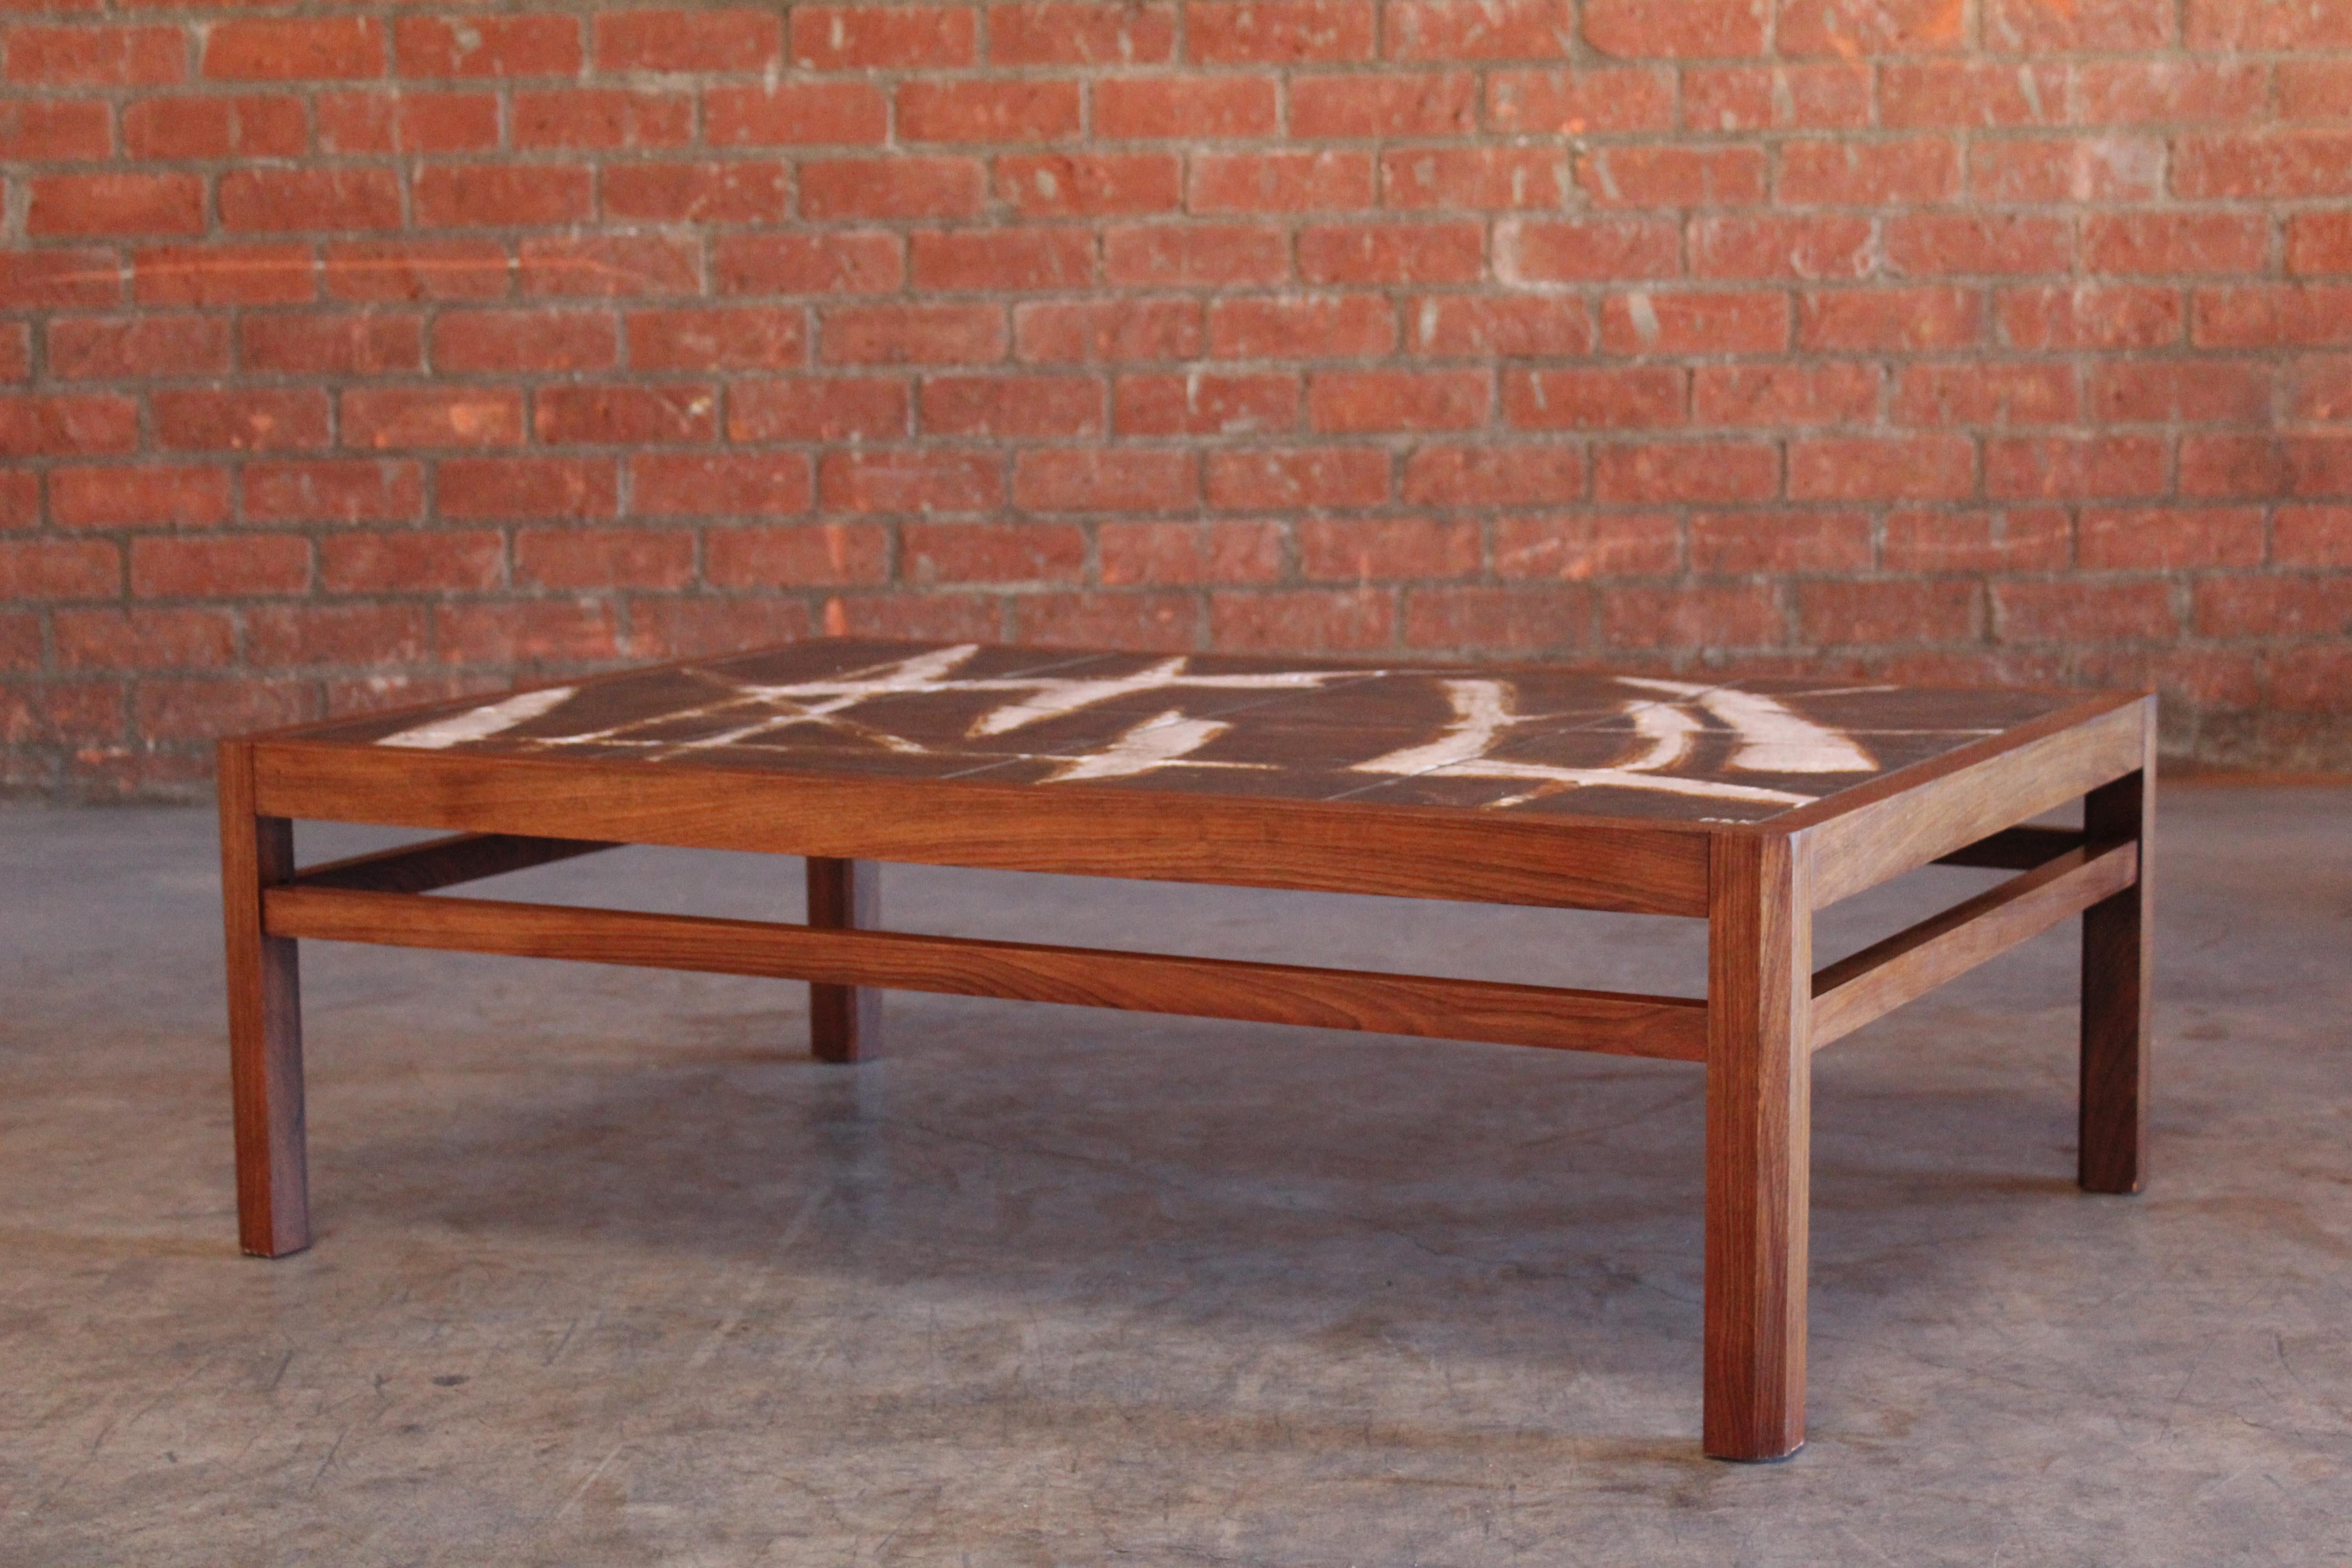 Mid-20th Century Danish Rosewood and Ceramic Tile Coffee Table by Ole Bjorn Krüger, 1960s For Sale